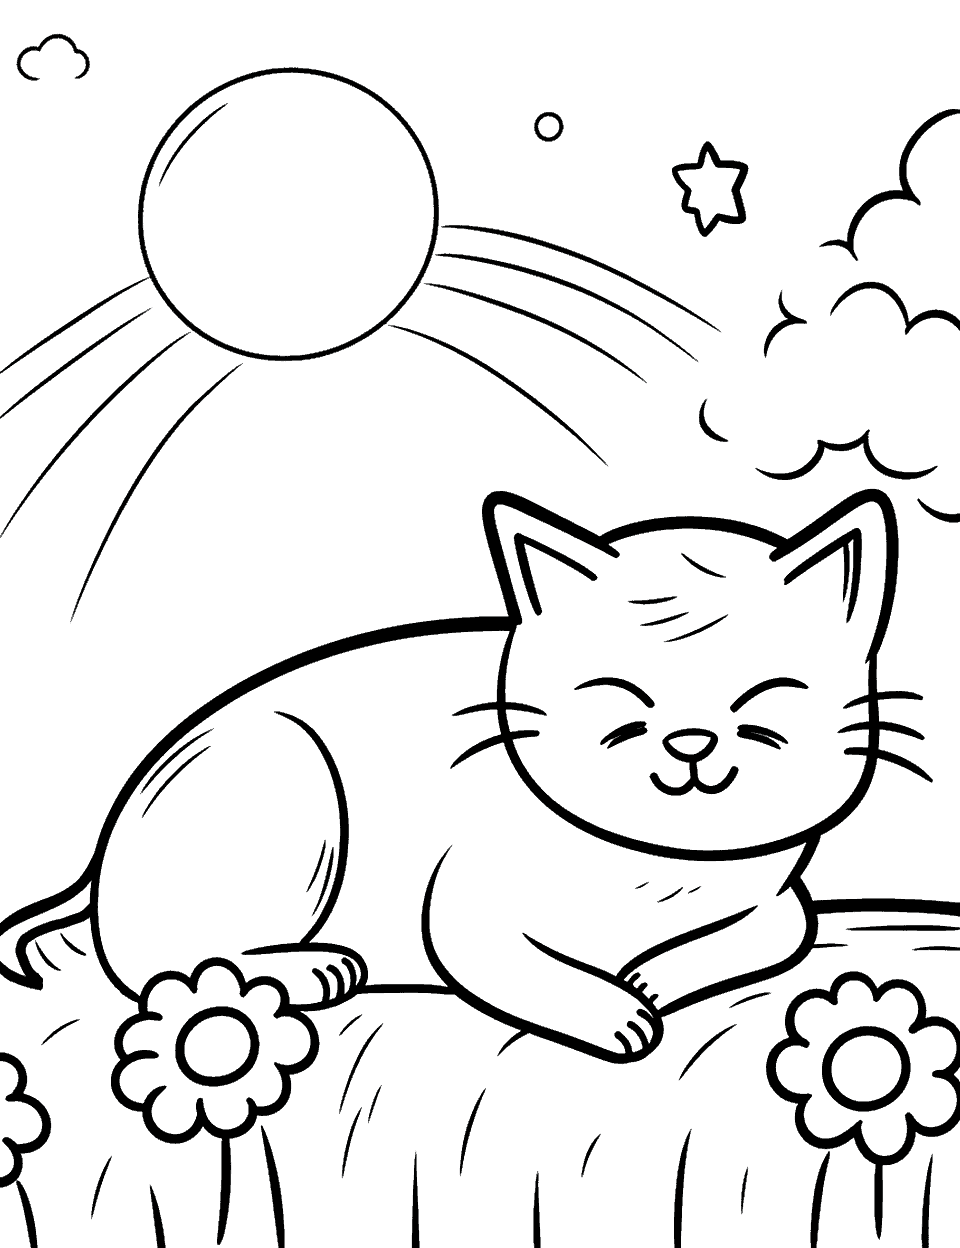 Cat Napping Coloring Page - A cute cat sleeping peacefully in a sunny spot.